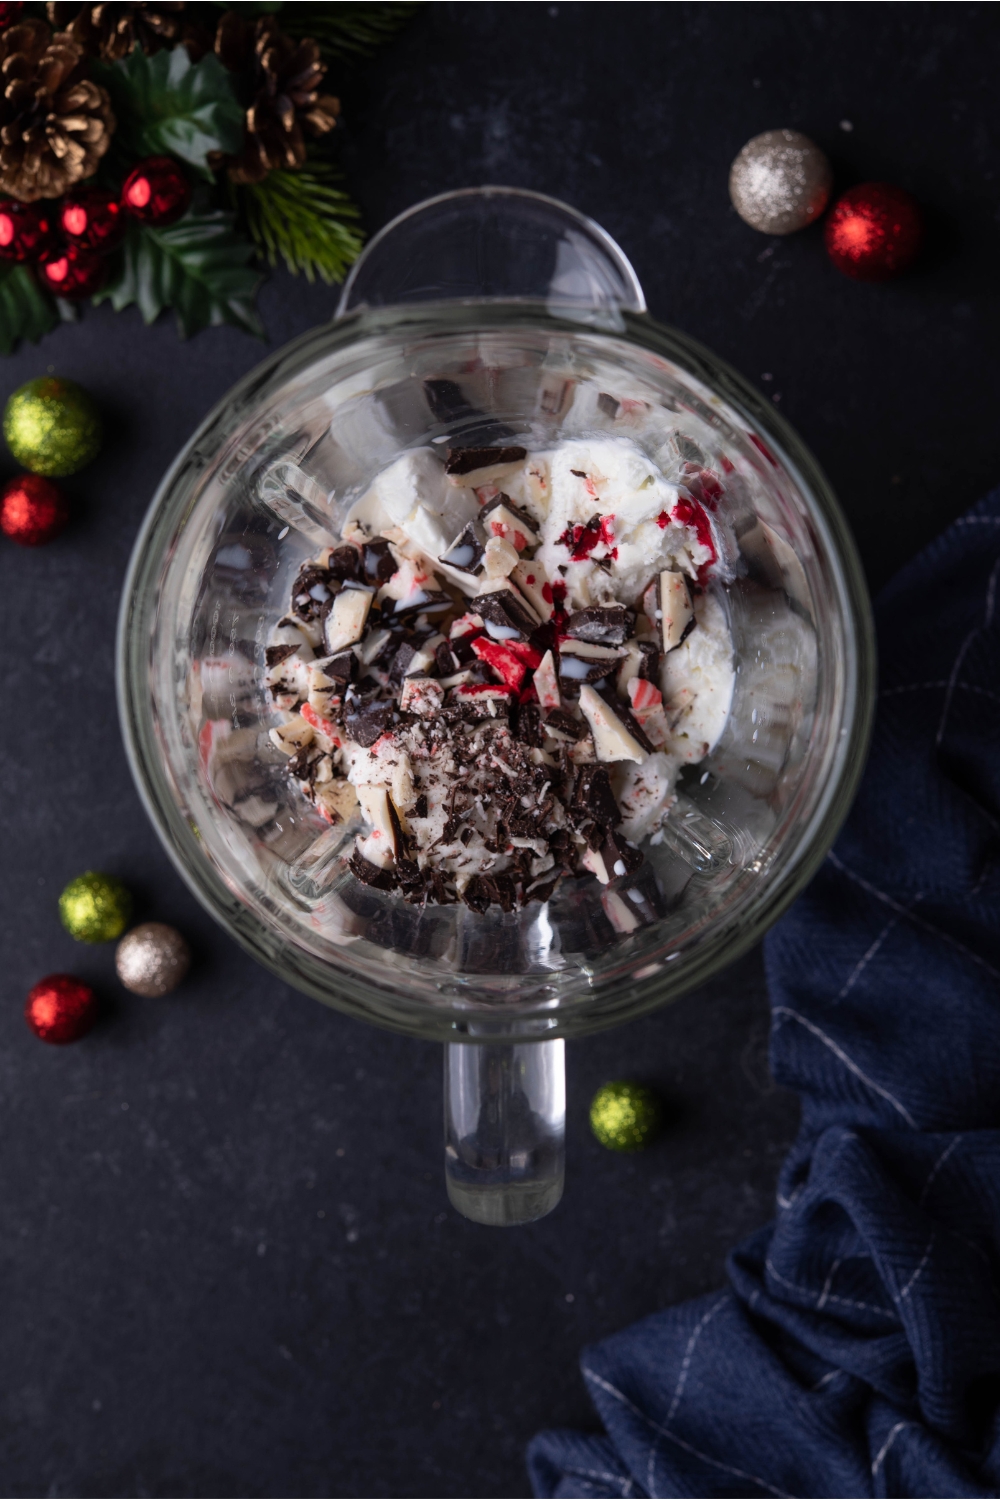 Blender filled with ice cream and peppermint bark, surrounded by Christmas ornaments.